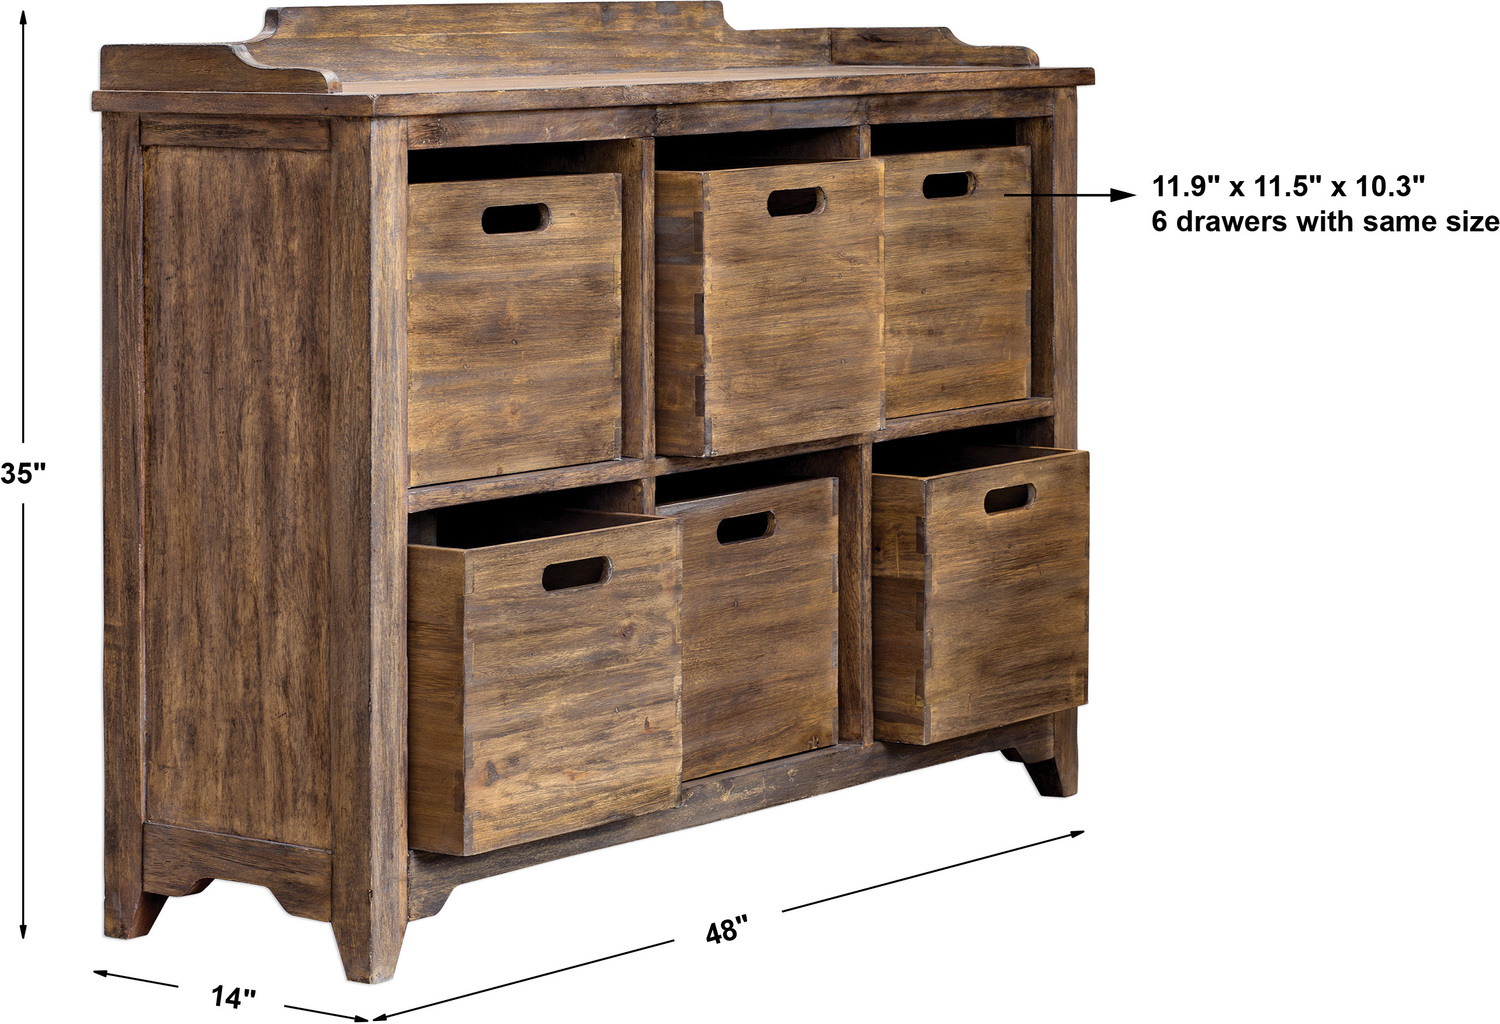 chest of drawers for kitchen storage Uttermost  Hobby Cupboard Craftsman Built Of Select Hardwoods Hand Finished In Driftwood With A Gray Wash. Features A Decorative Tray Styled Top And Six Solid Mahogany Dovetail Bins. Keep Handle Openings Facing Out For Ease Of Use Or Turn To Show Solid Sides For More Concealed Storage.